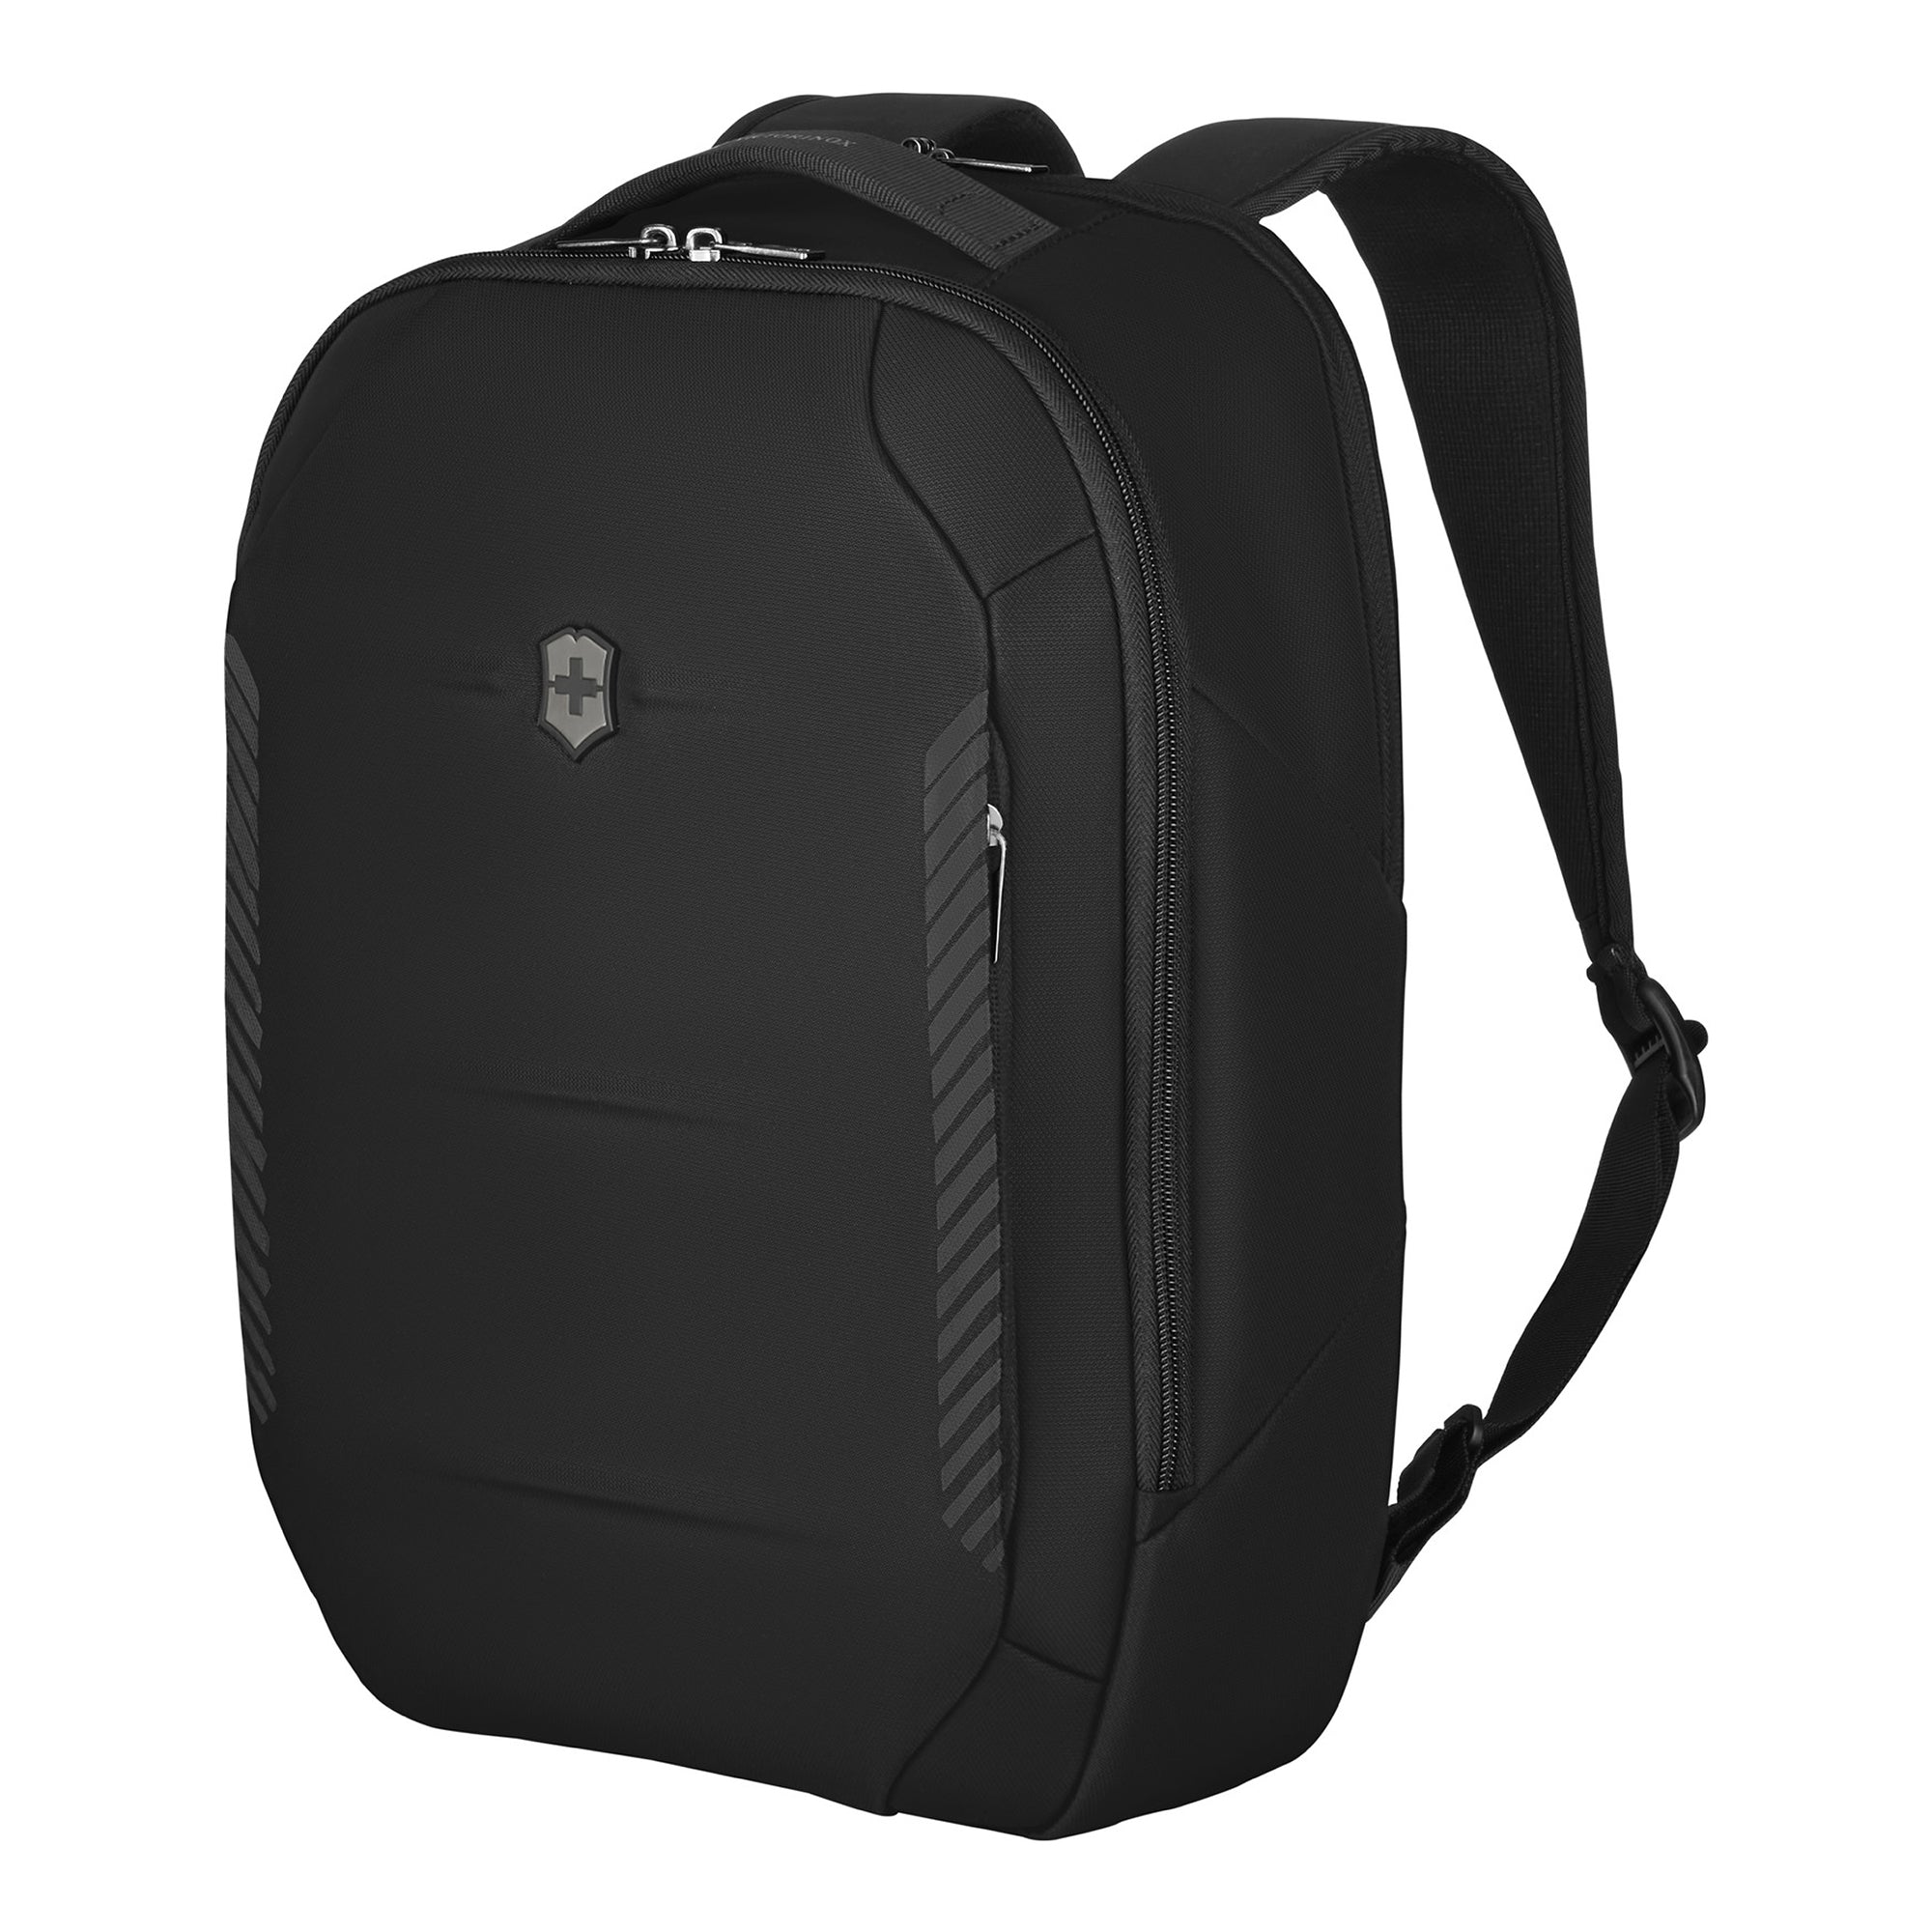 Polyester Black Travel Luggage Backpack, Bag Capacity: 15 To 20 Kg